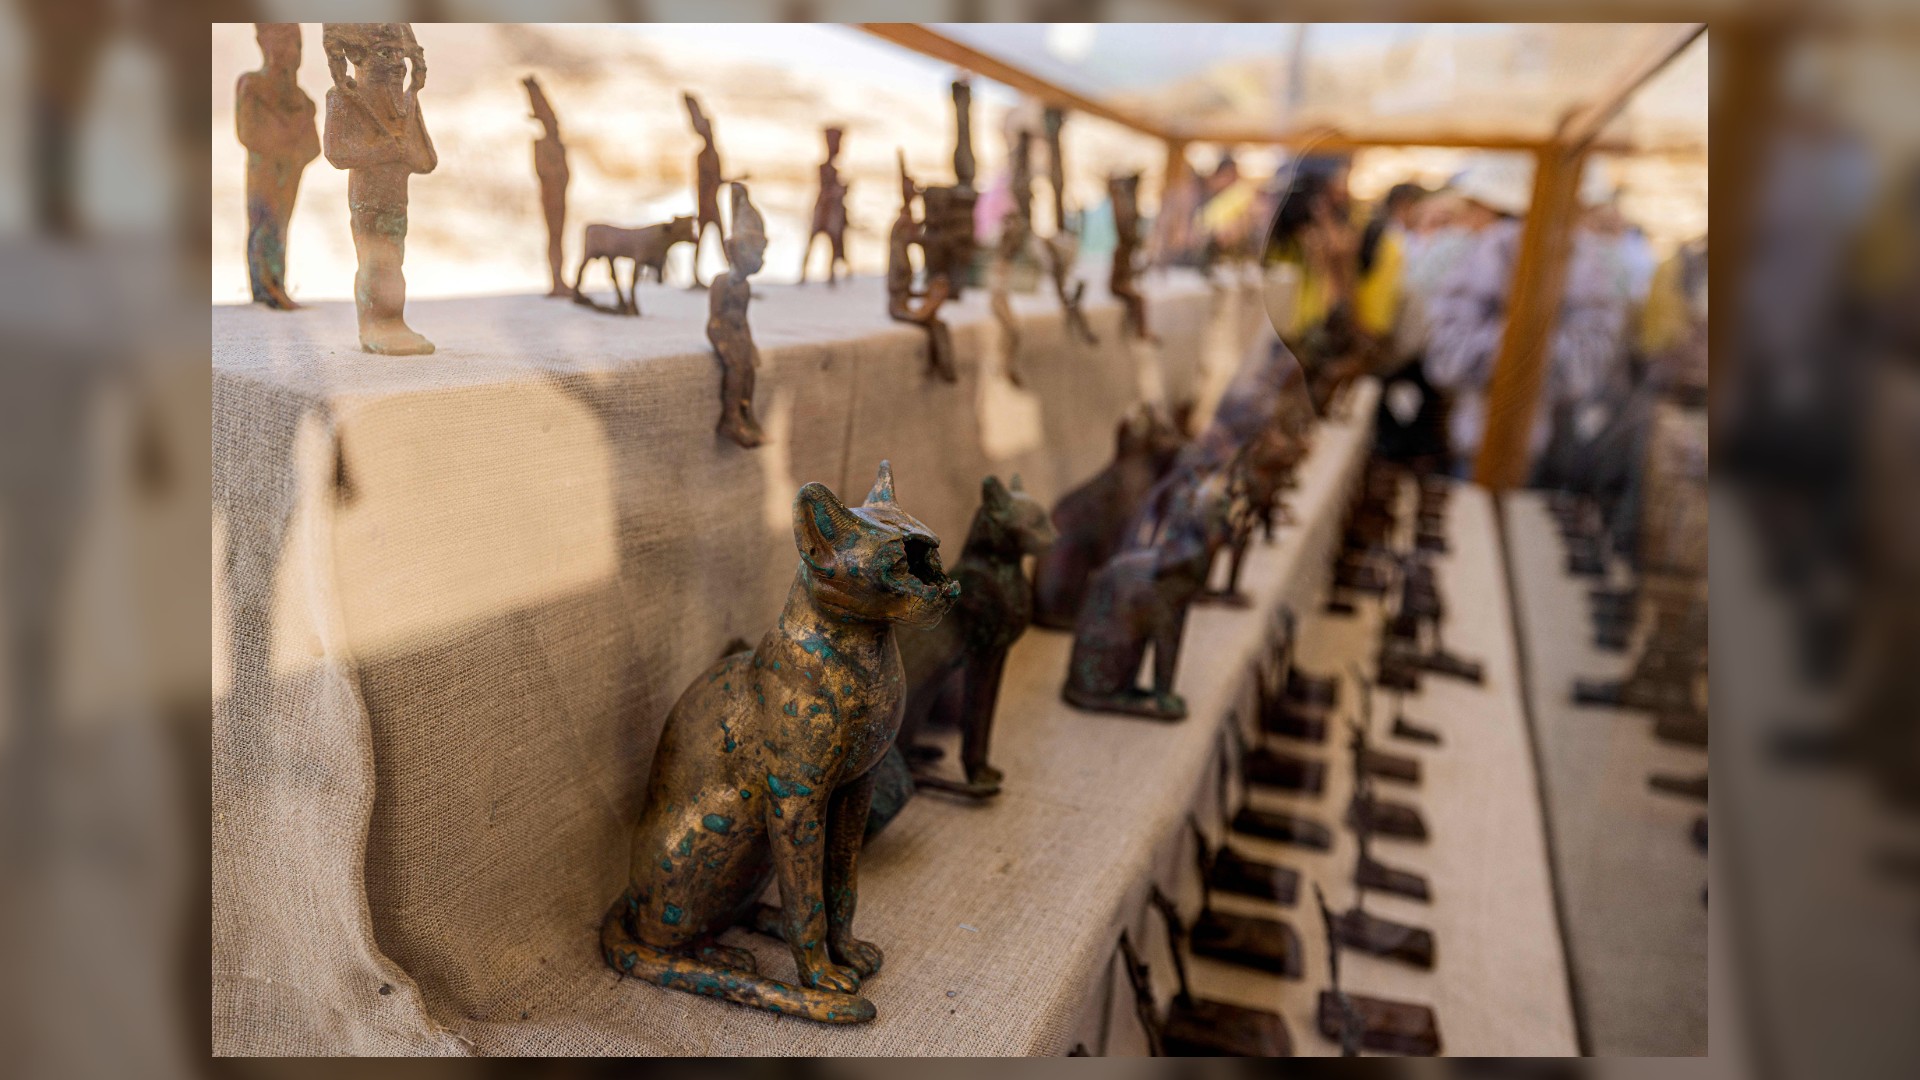 Statuettes and figurines depicting cats and Egyptian deities have been found in a cache from the Late Egyptian period (around the 5th century BC). There are many bronze statues depicting various Egyptian gods and goddesses such as Bastet, Anubis, Osiris, Amunmeen, Isis, Nefertum and Hathor.